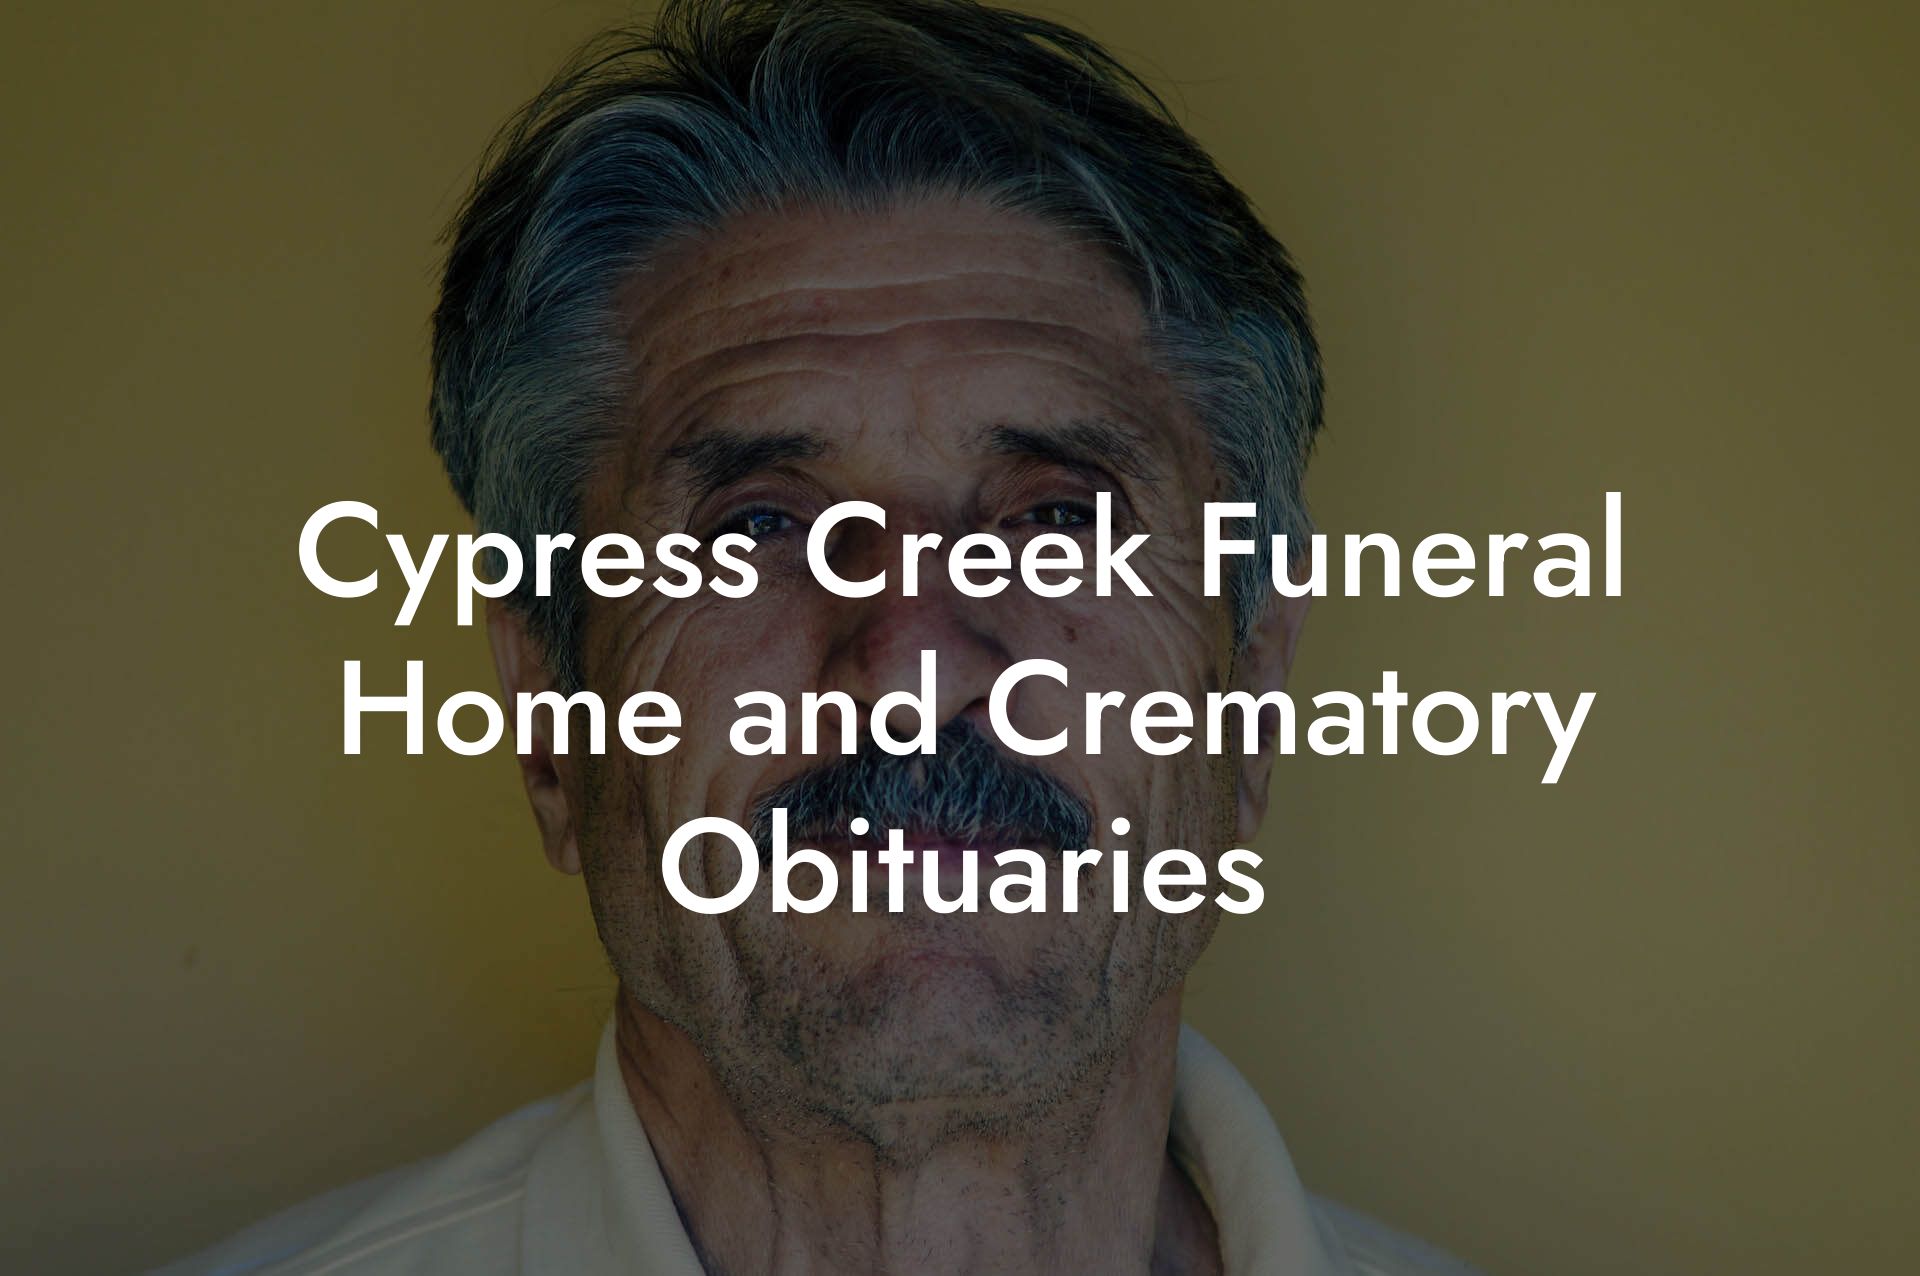 Cypress Creek Funeral Home and Crematory Obituaries